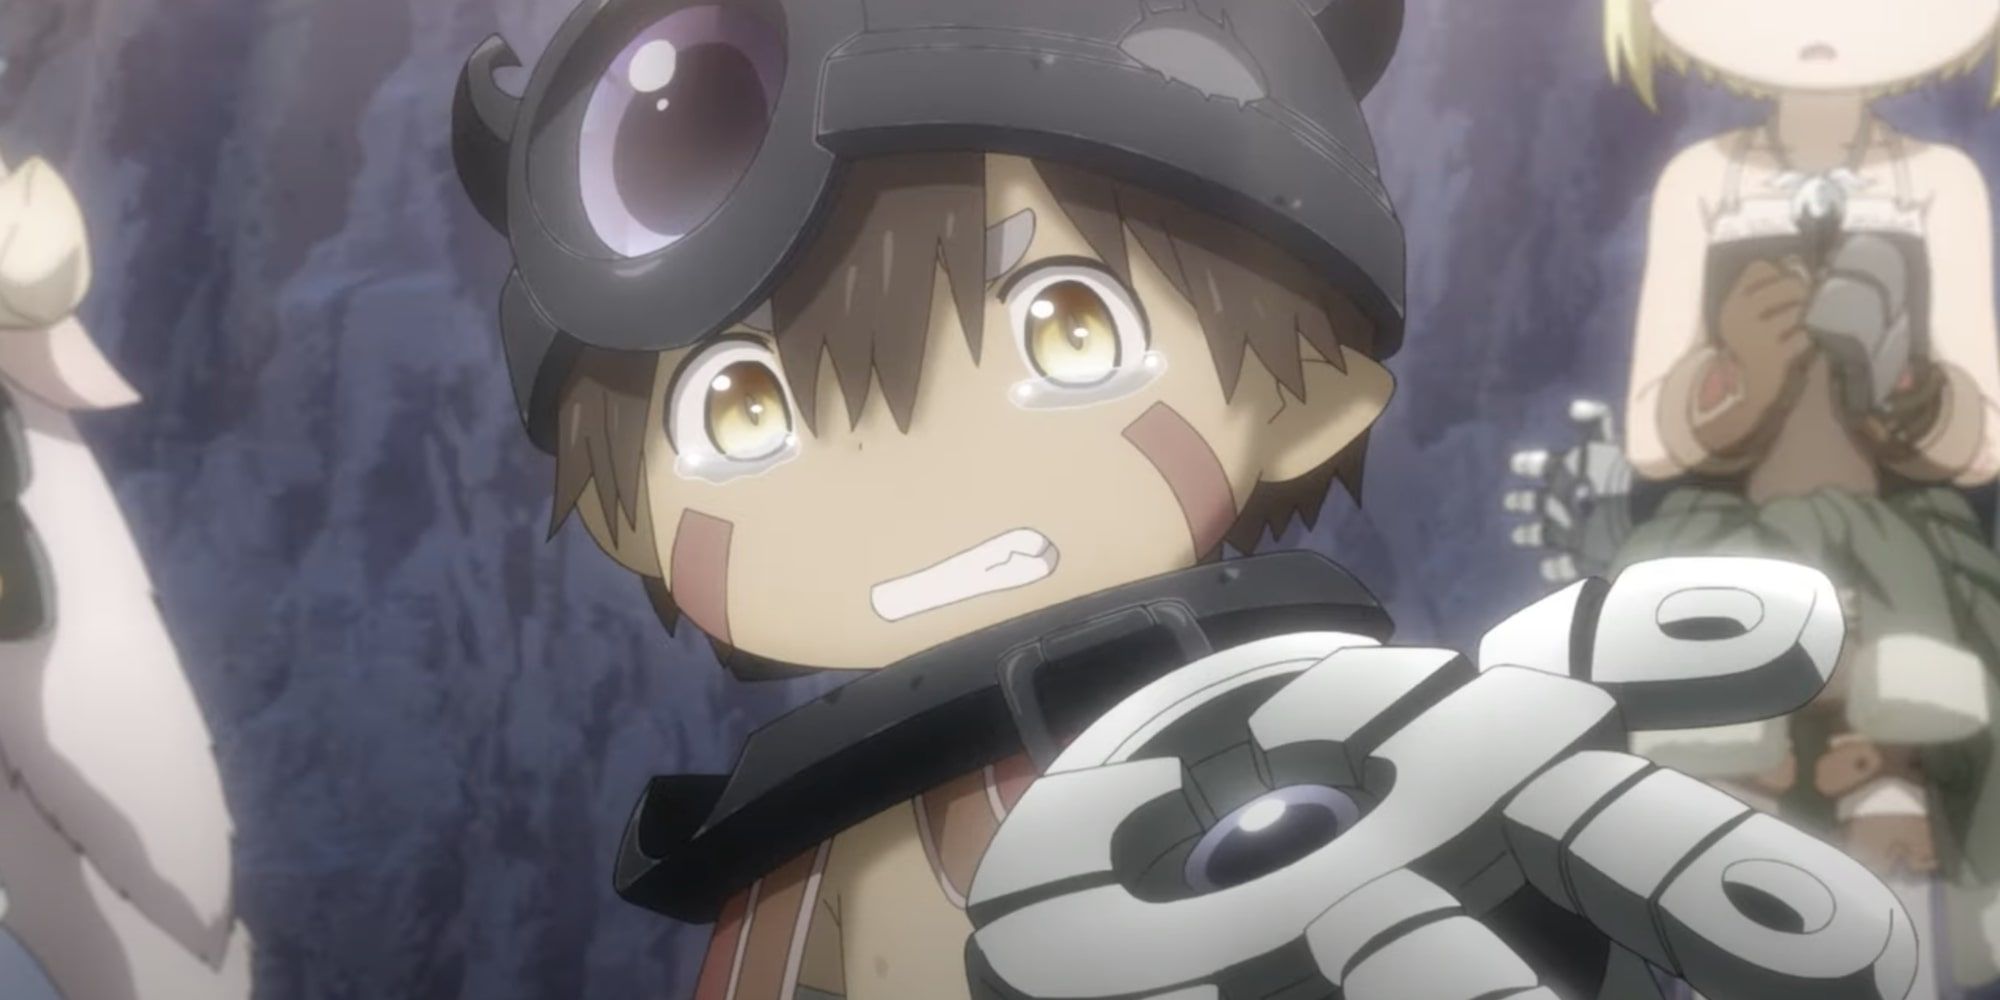 Made in Abyss Season 2 The Sun Blazes Upon the Golden City release